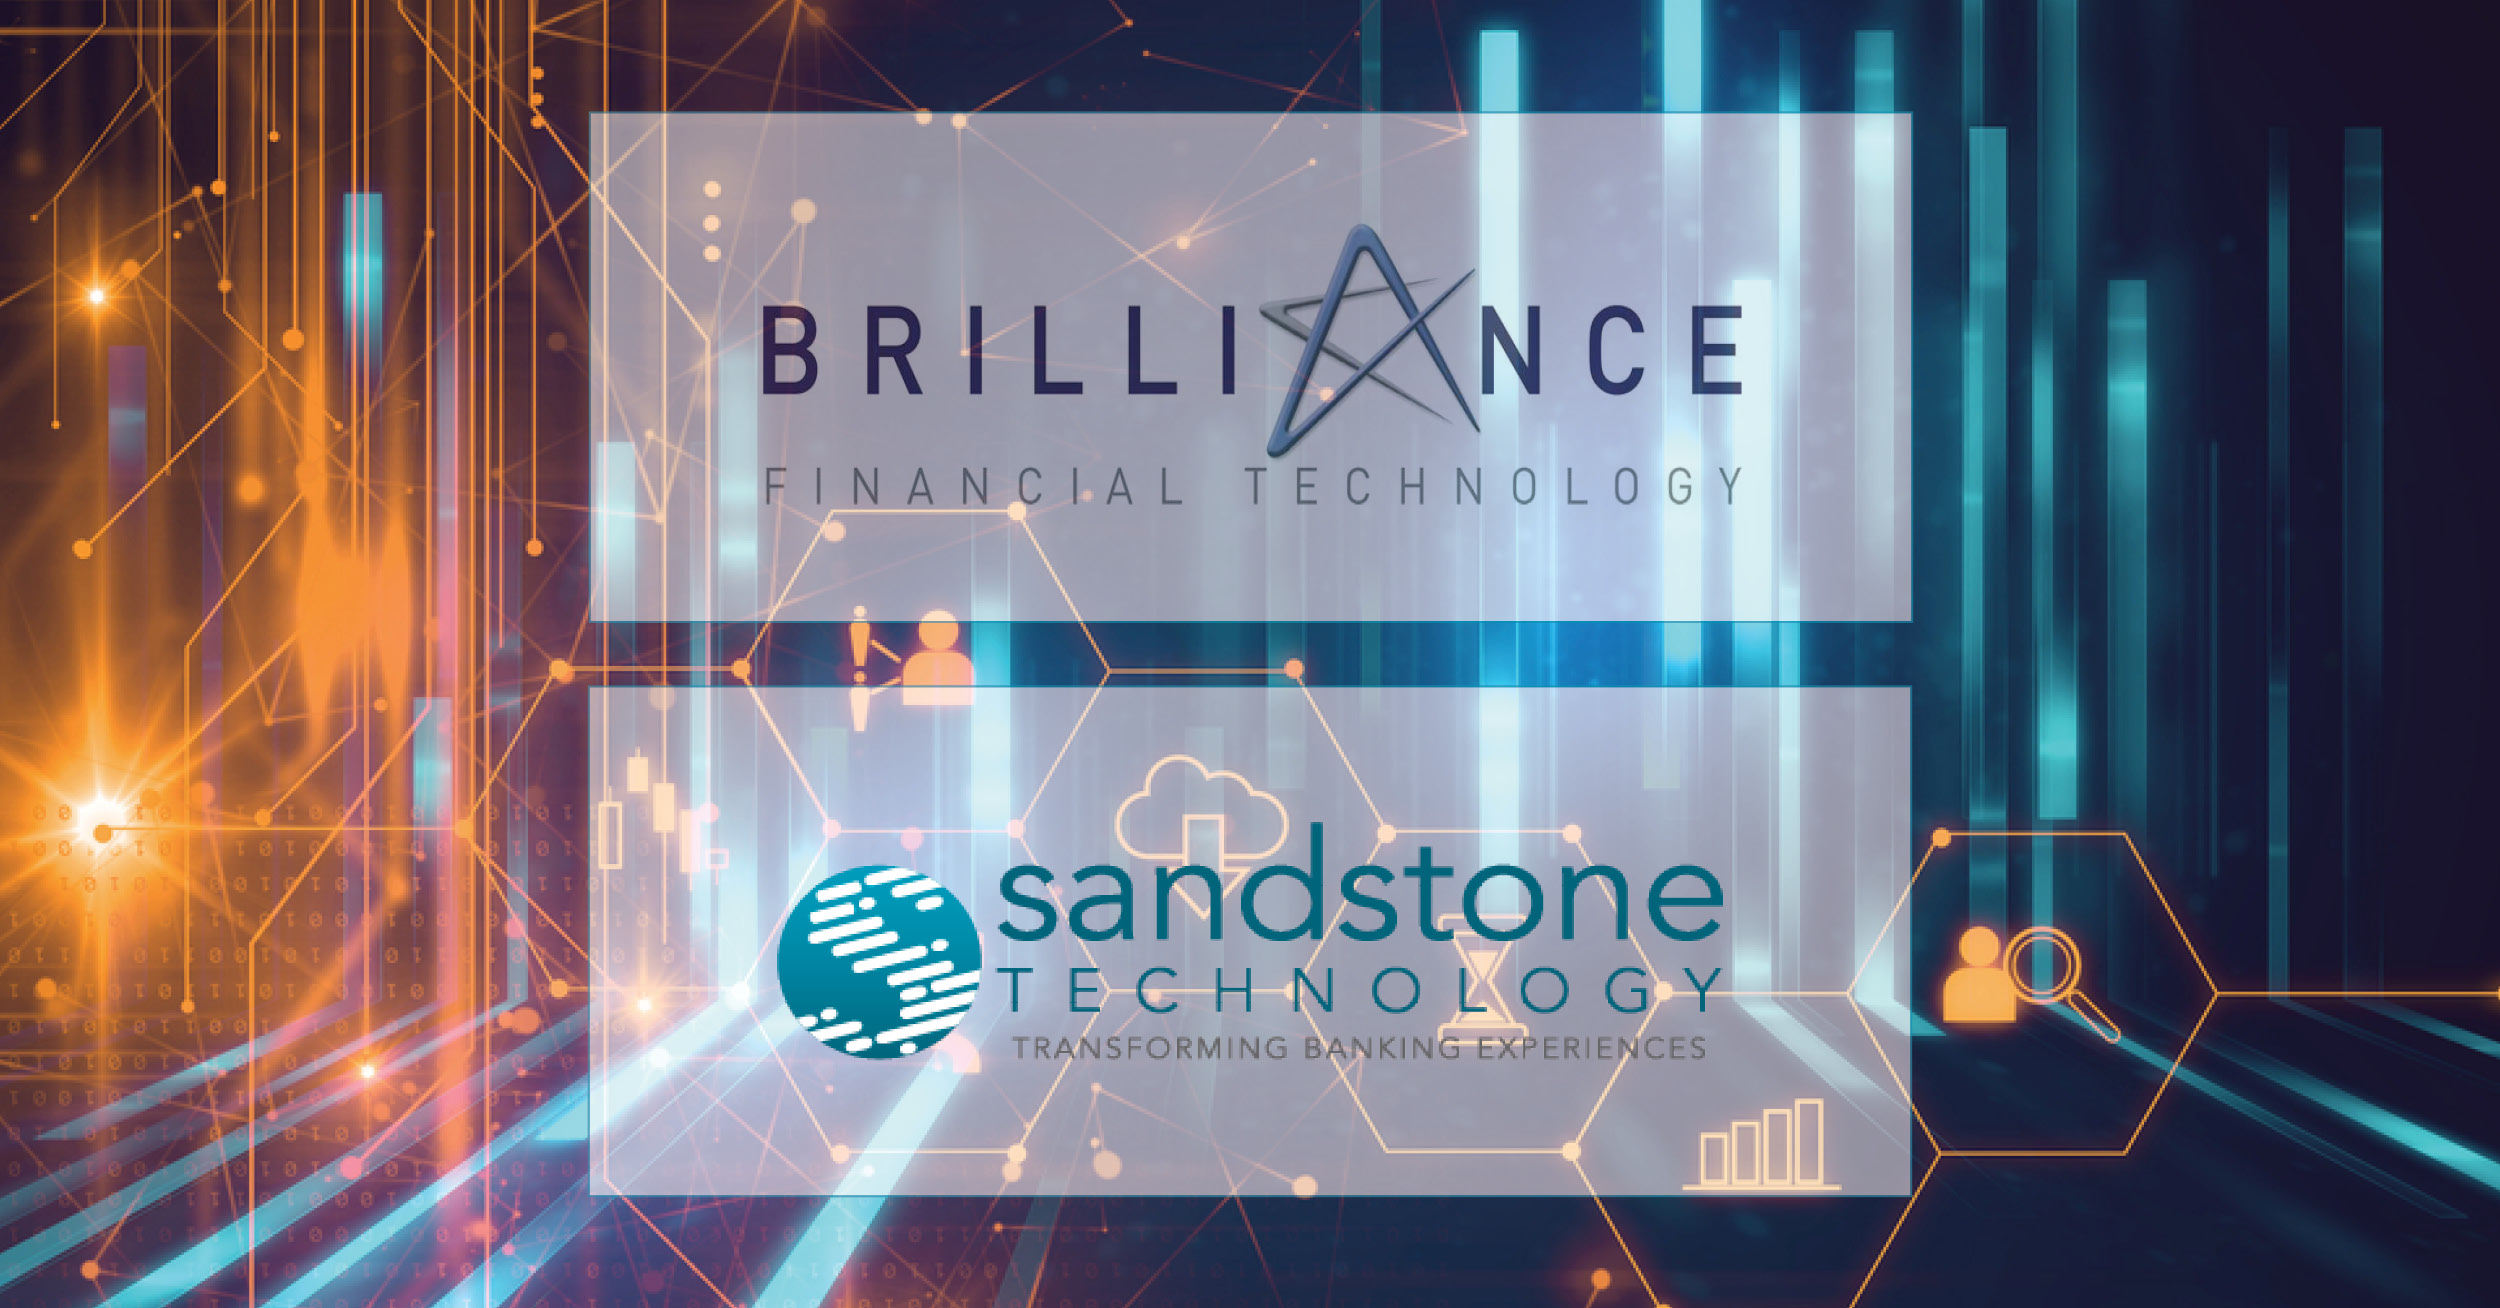 Sandstone Technology partners with Brilliance Financial Technology to offer in-built pricing and profitability to the SME market